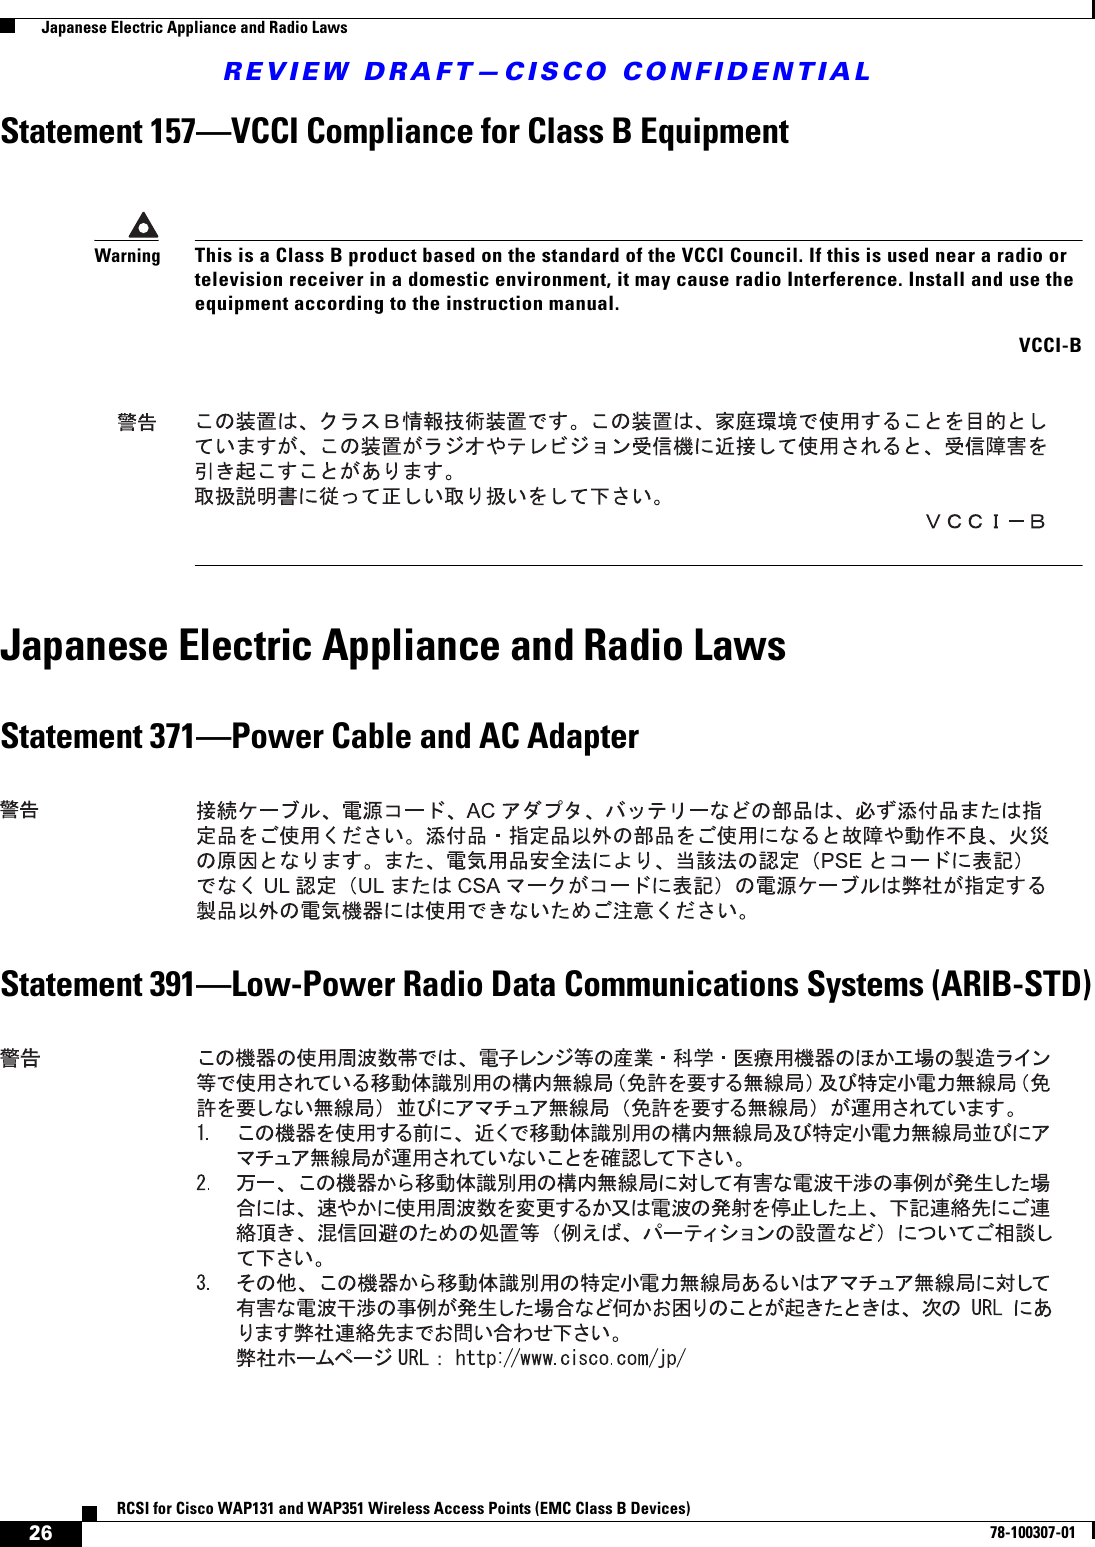 REVIEW DRAFT—CISCO CONFIDENTIAL26RCSI for Cisco WAP131 and WAP351 Wireless Access Points (EMC Class B Devices)78-100307-01  Japanese Electric Appliance and Radio LawsStatement 157—VCCI Compliance for Class B EquipmentJapanese Electric Appliance and Radio LawsStatement 371—Power Cable and AC AdapterStatement 391—Low-Power Radio Data Communications Systems (ARIB-STD)WarningThis is a Class B product based on the standard of the VCCI Council. If this is used near a radio or television receiver in a domestic environment, it may cause radio Interference. Install and use the equipment according to the instruction manual. VCCI-B